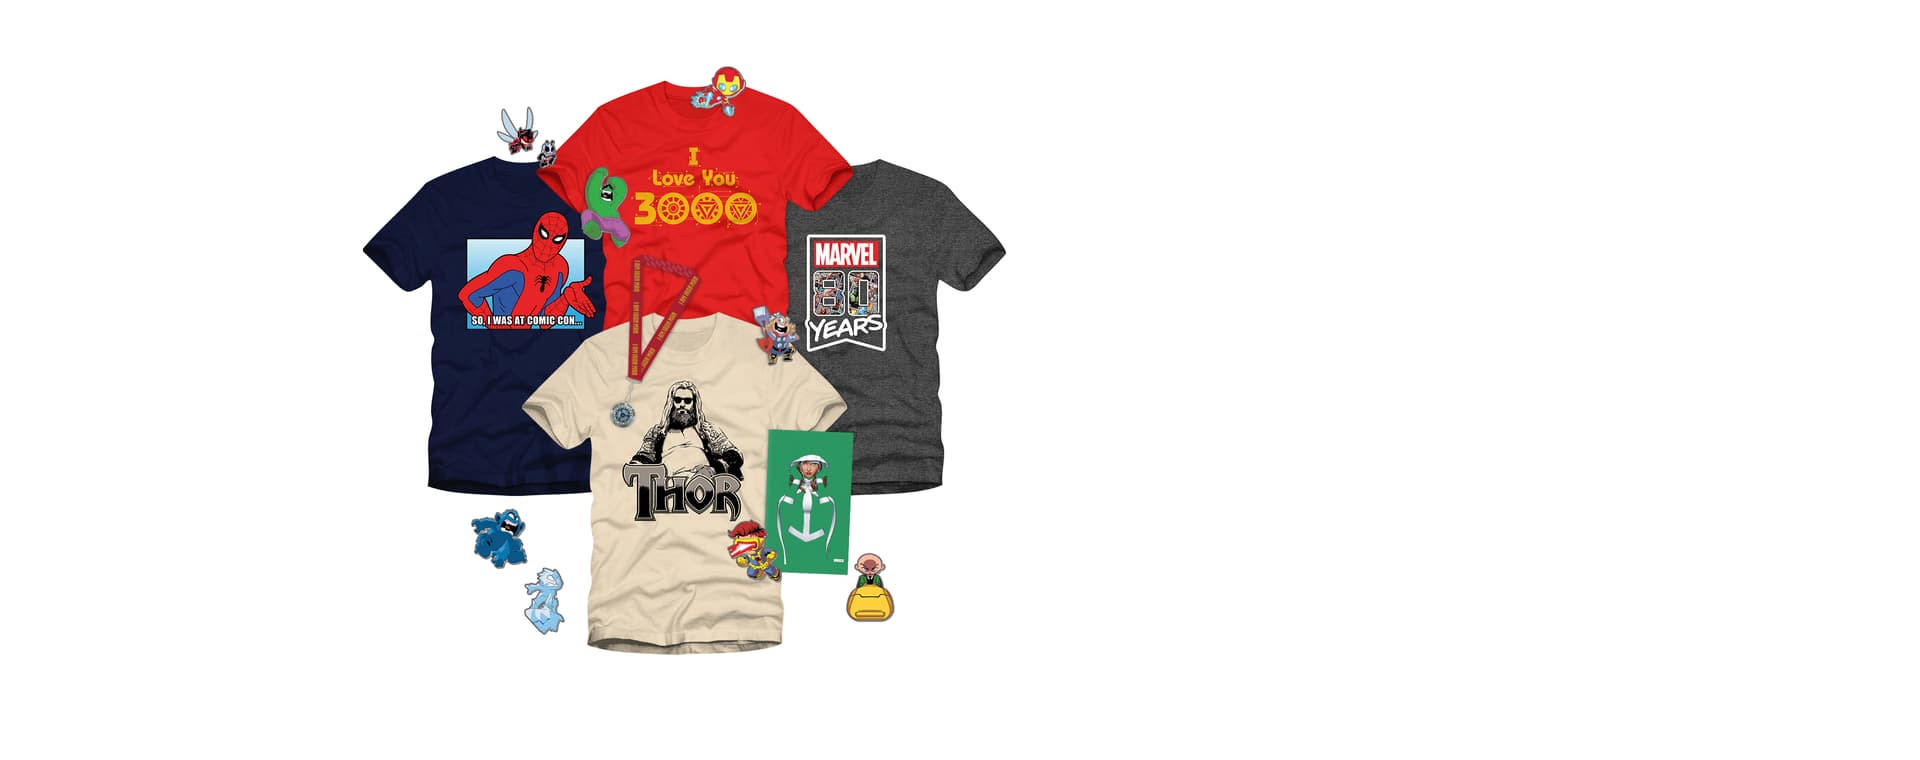 San Diego Comic-Con 2019 Marvel Booth #2329 Marvel Merchandise Comics T-shirts and more!